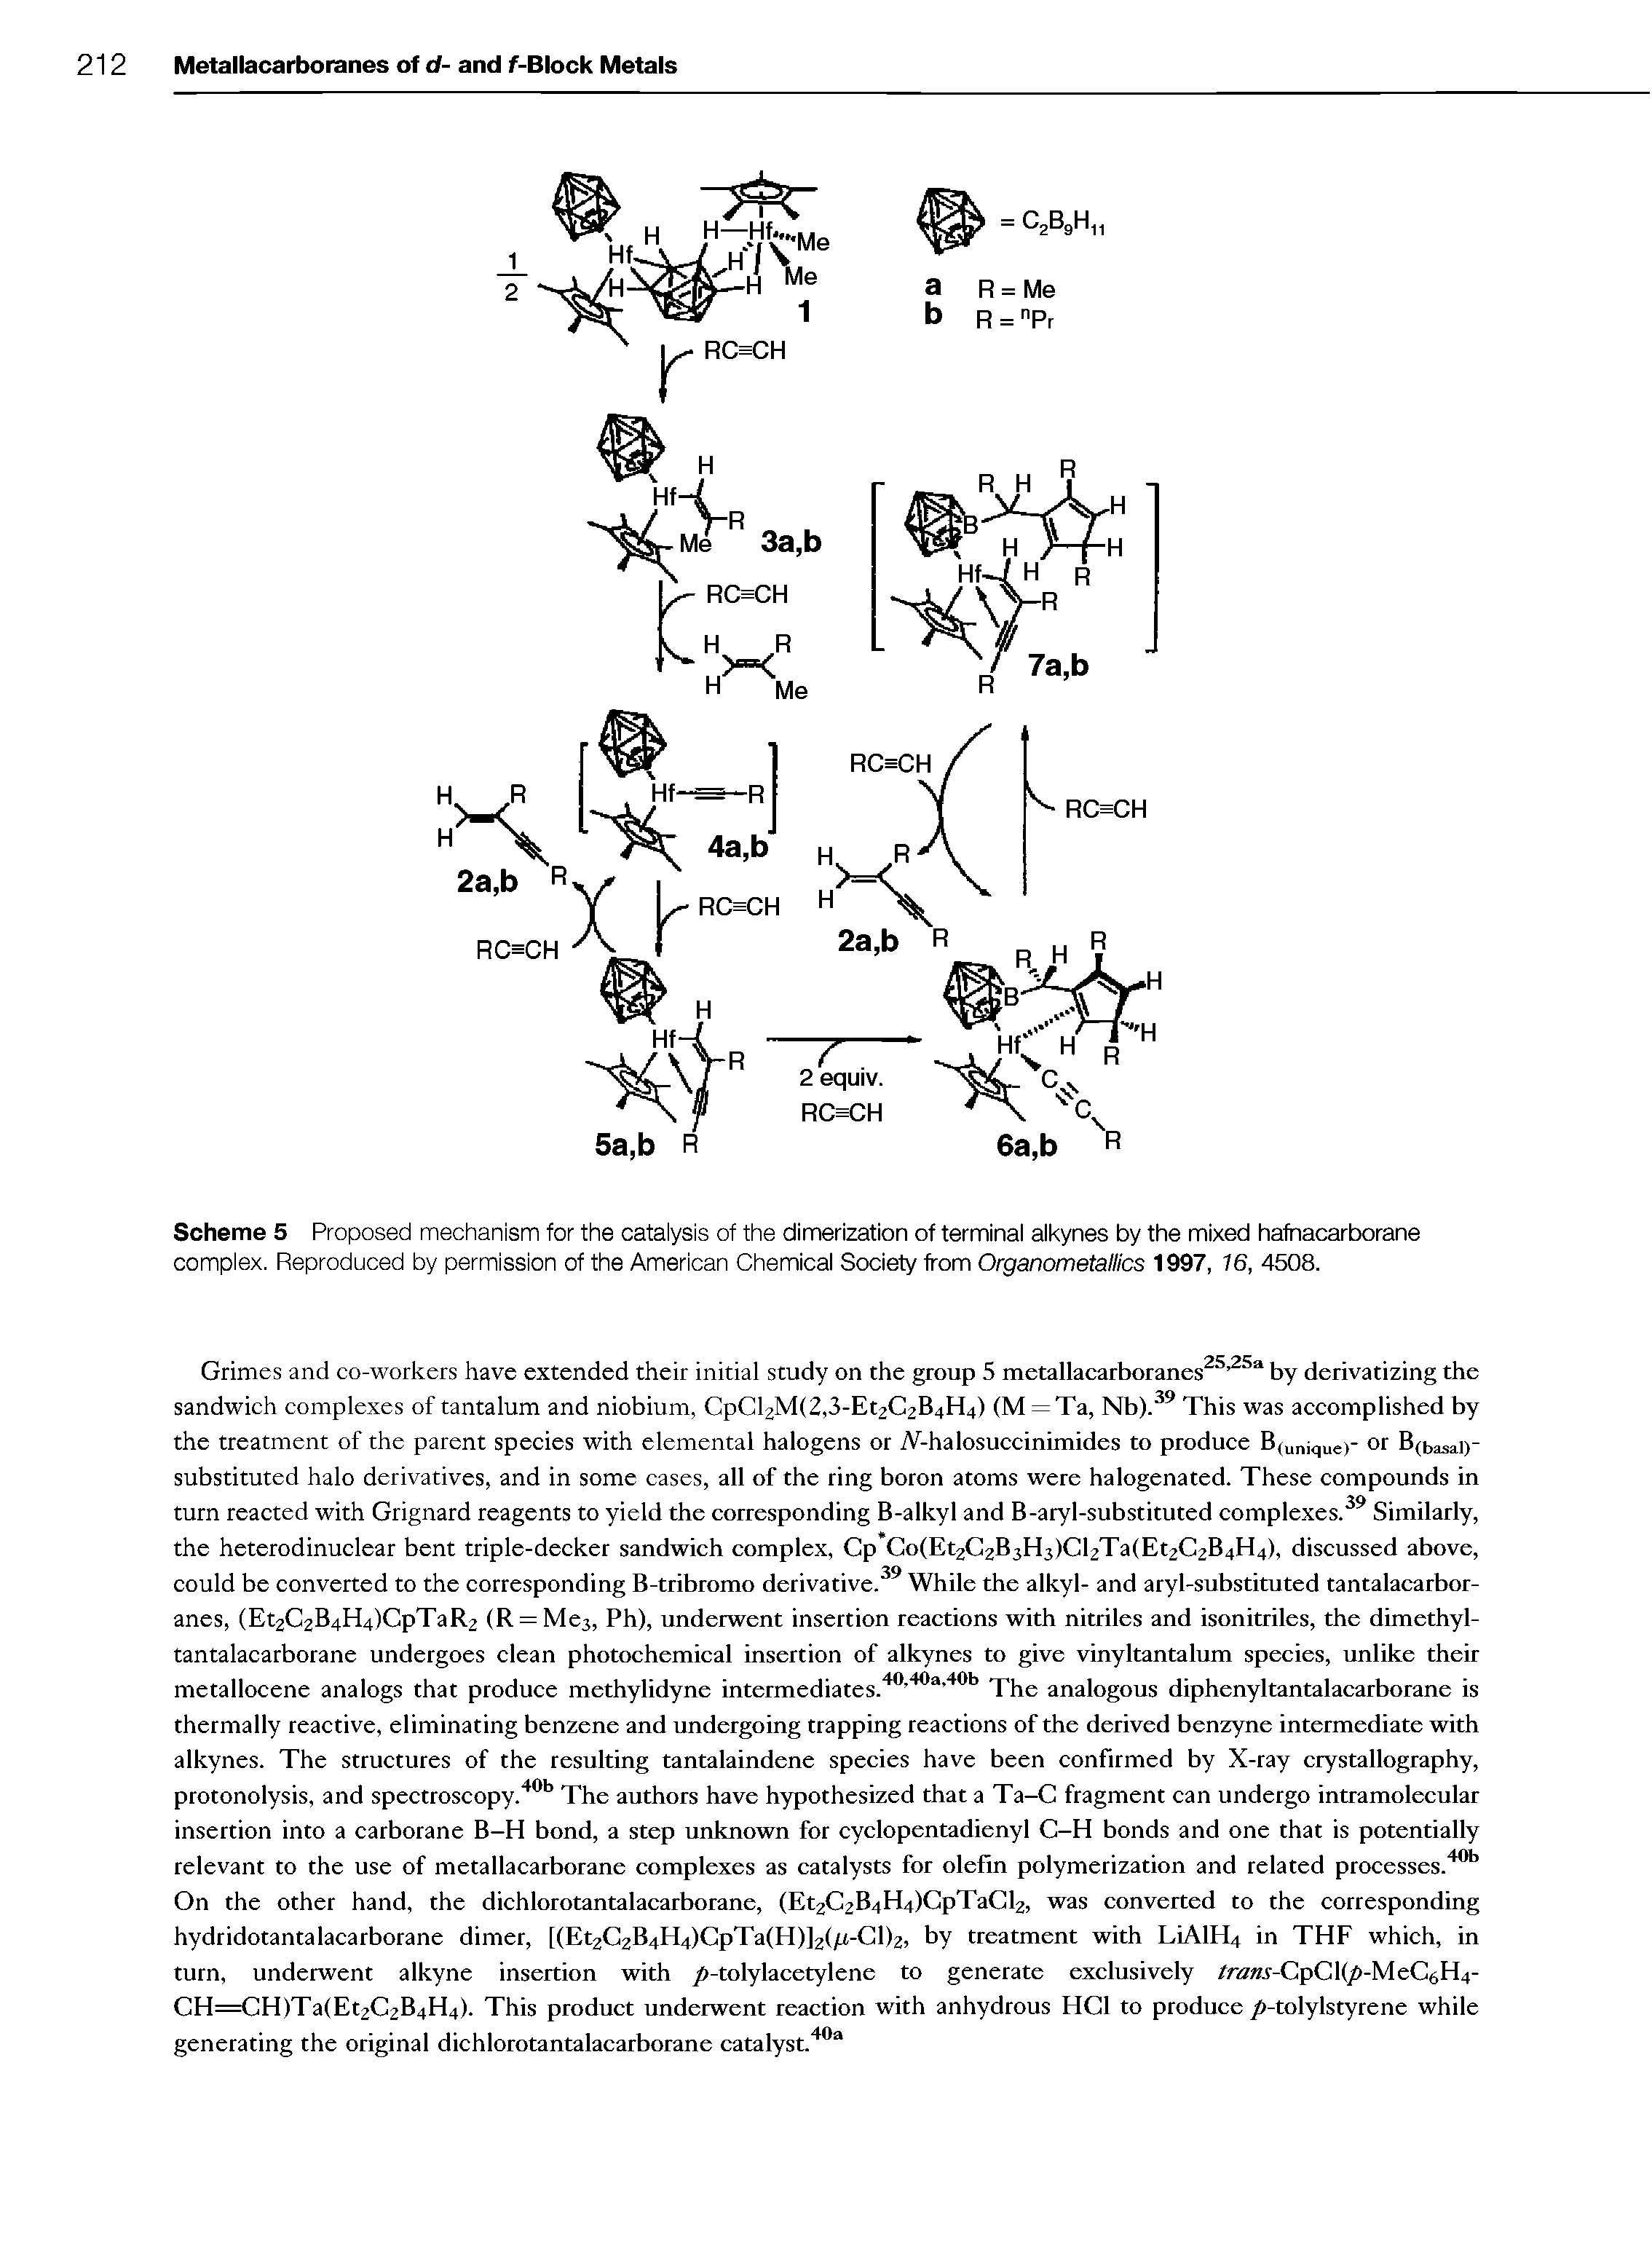 Scheme 5 Proposed mechanism for the catalysis of the dimerization of terminal alkynes by the mixed hafnacarborane complex. Reproduced by permission of the American Chemical Society from Organometallics 1997, 16, 4508.